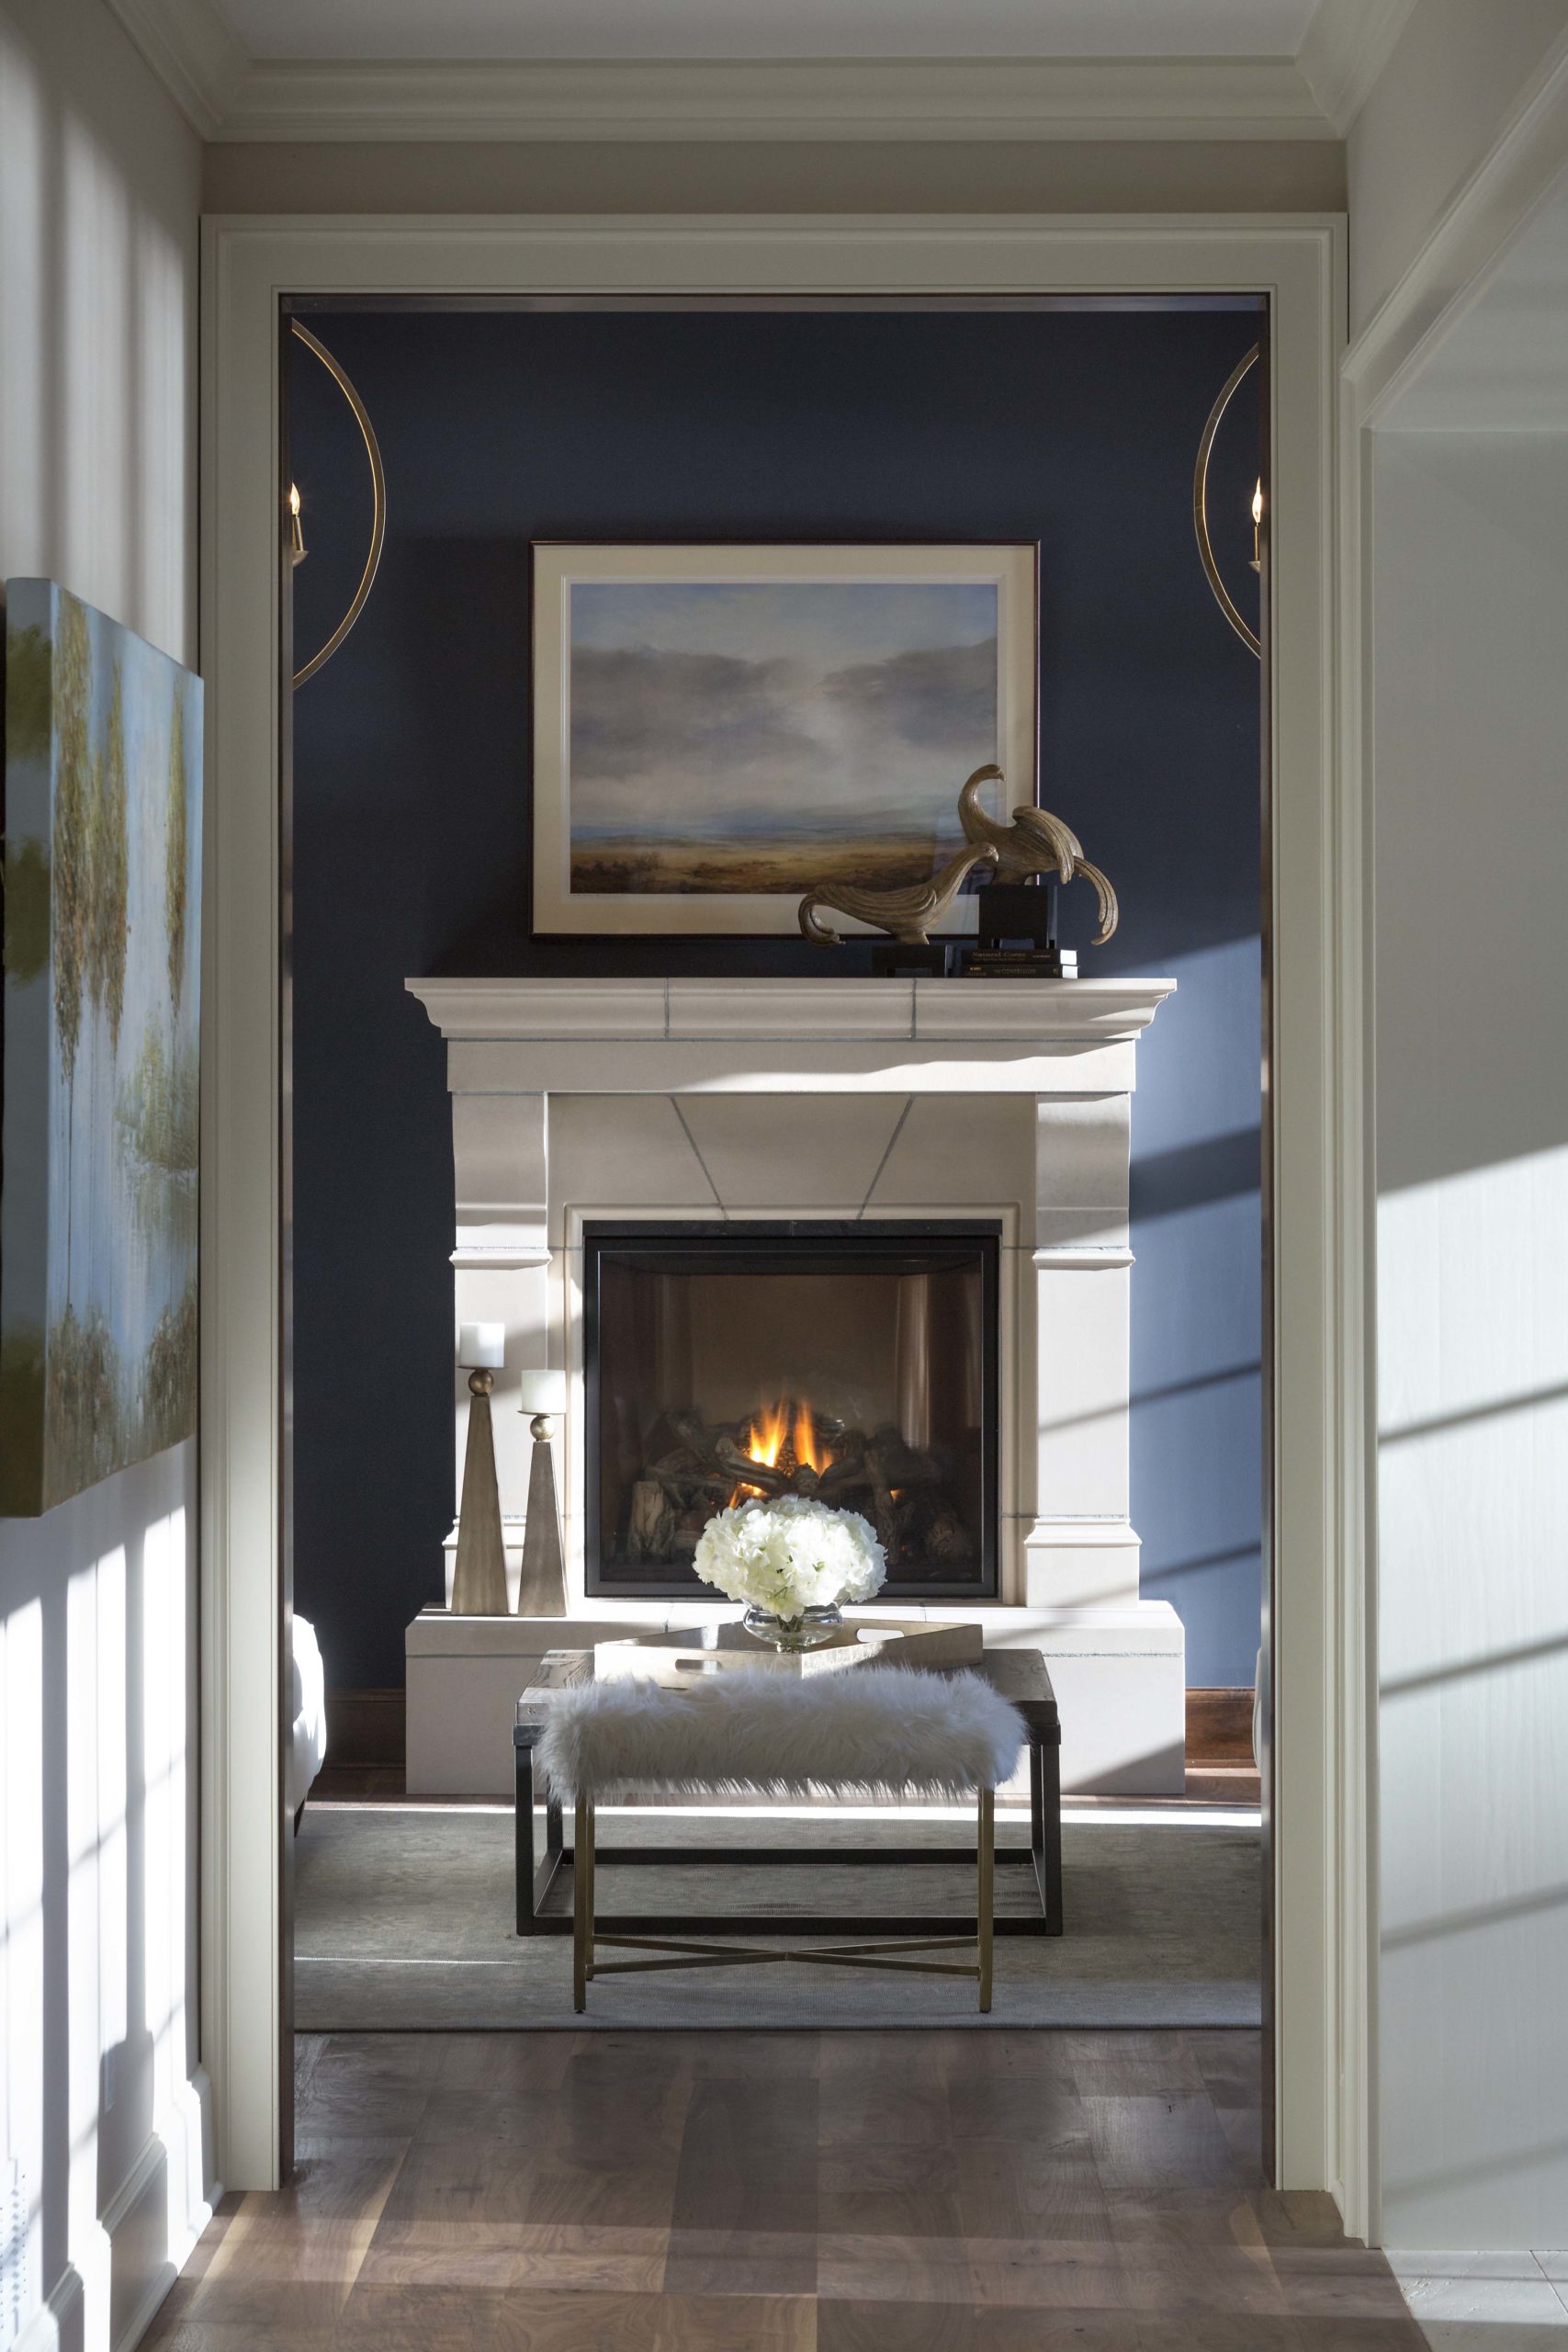 Grimes Avenue's hallway is adorned with blue walls and features a cozy fireplace.